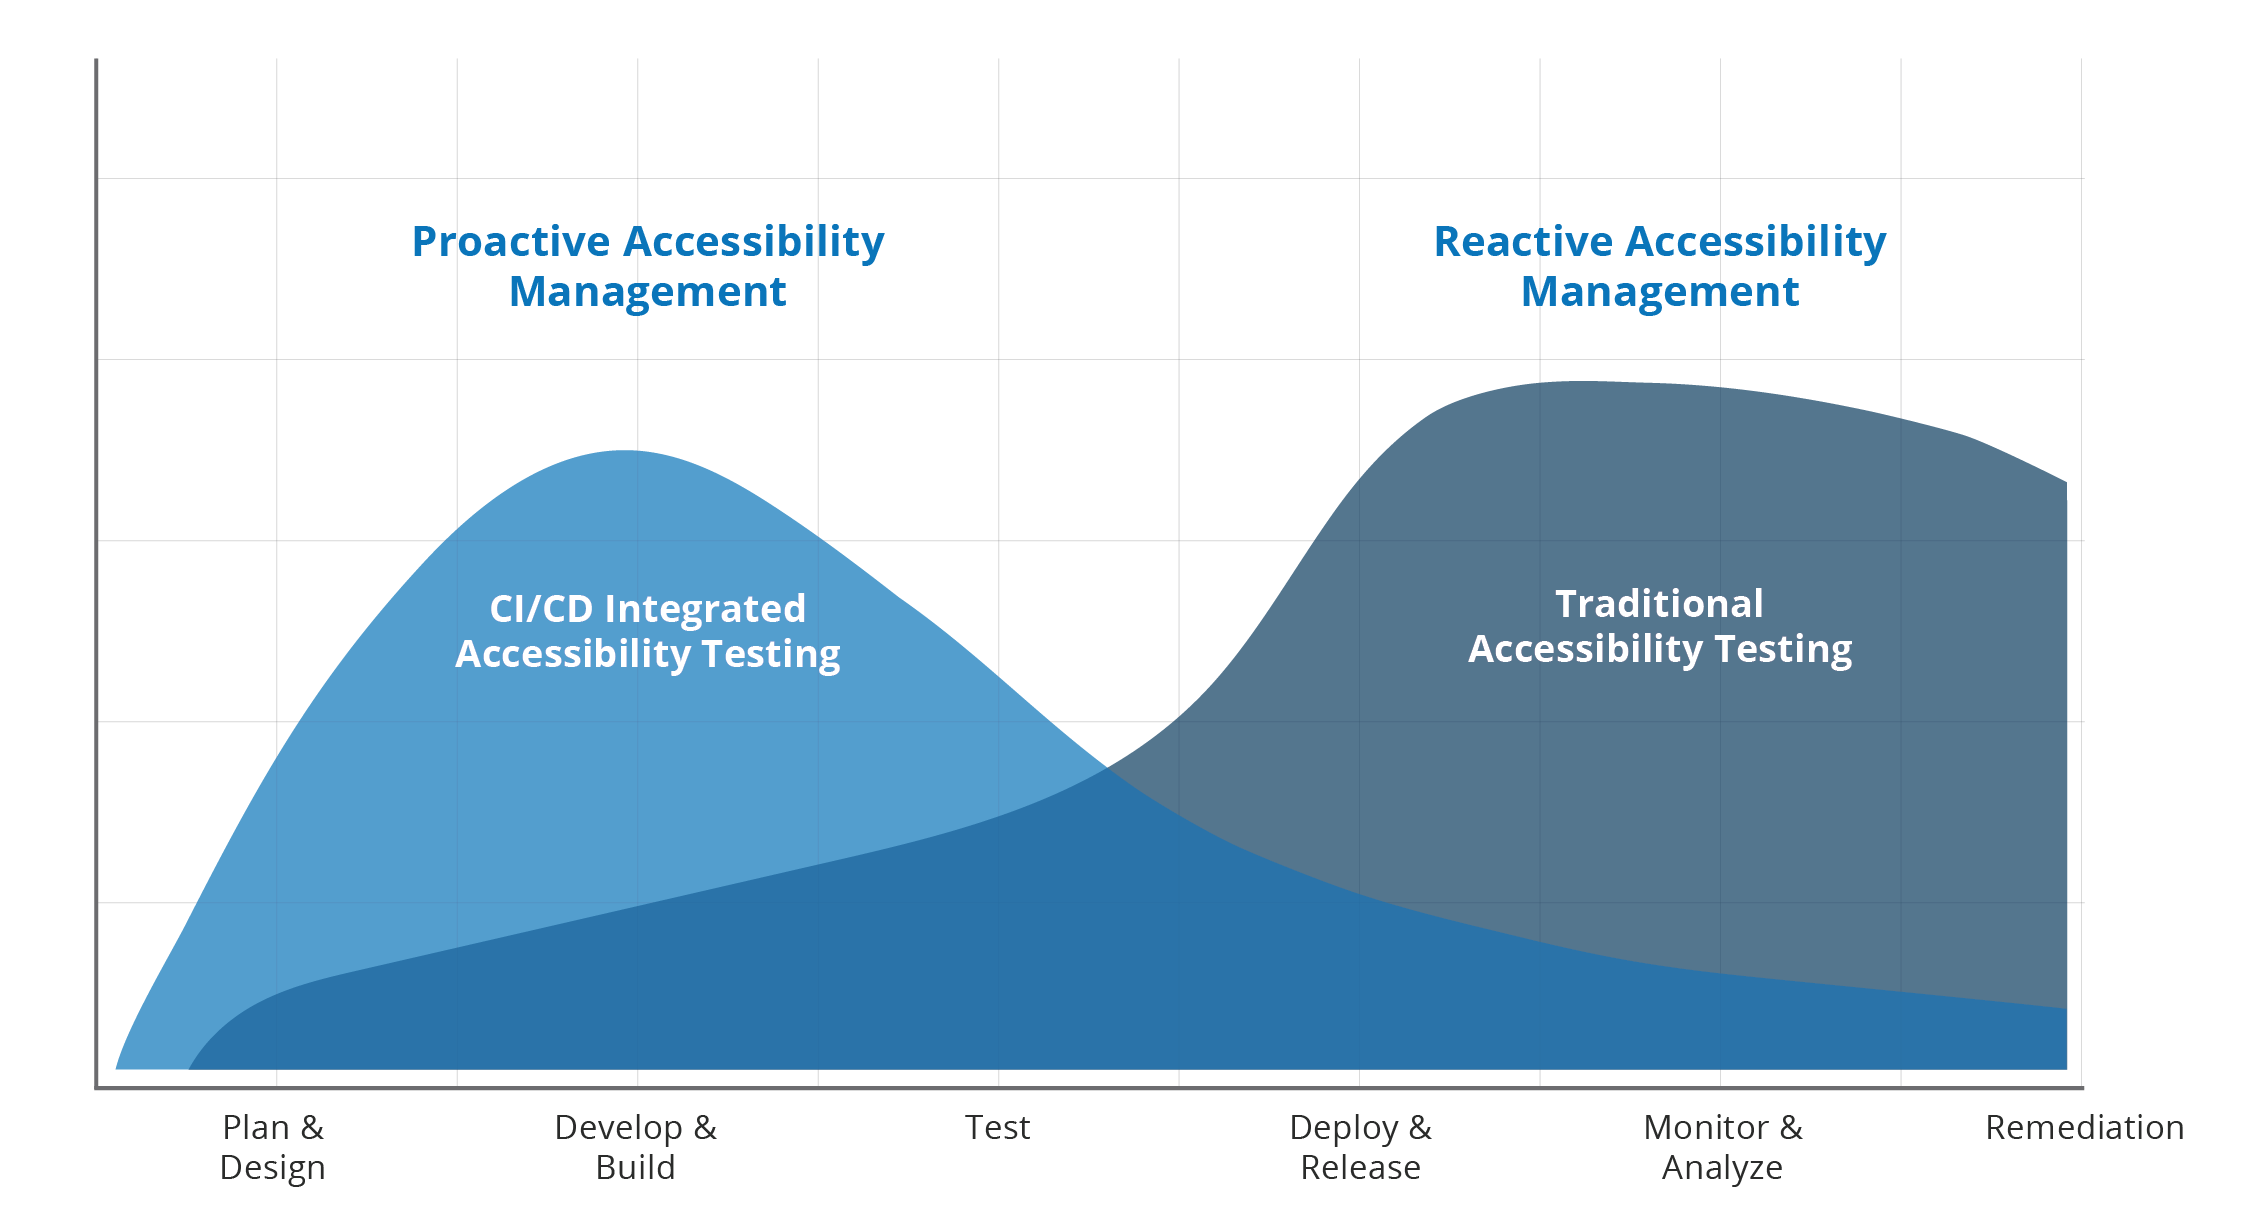 Chart demonstrating reduced efforts over time by utilizing proactive accessibility management in the plan and design phase of the SDLC